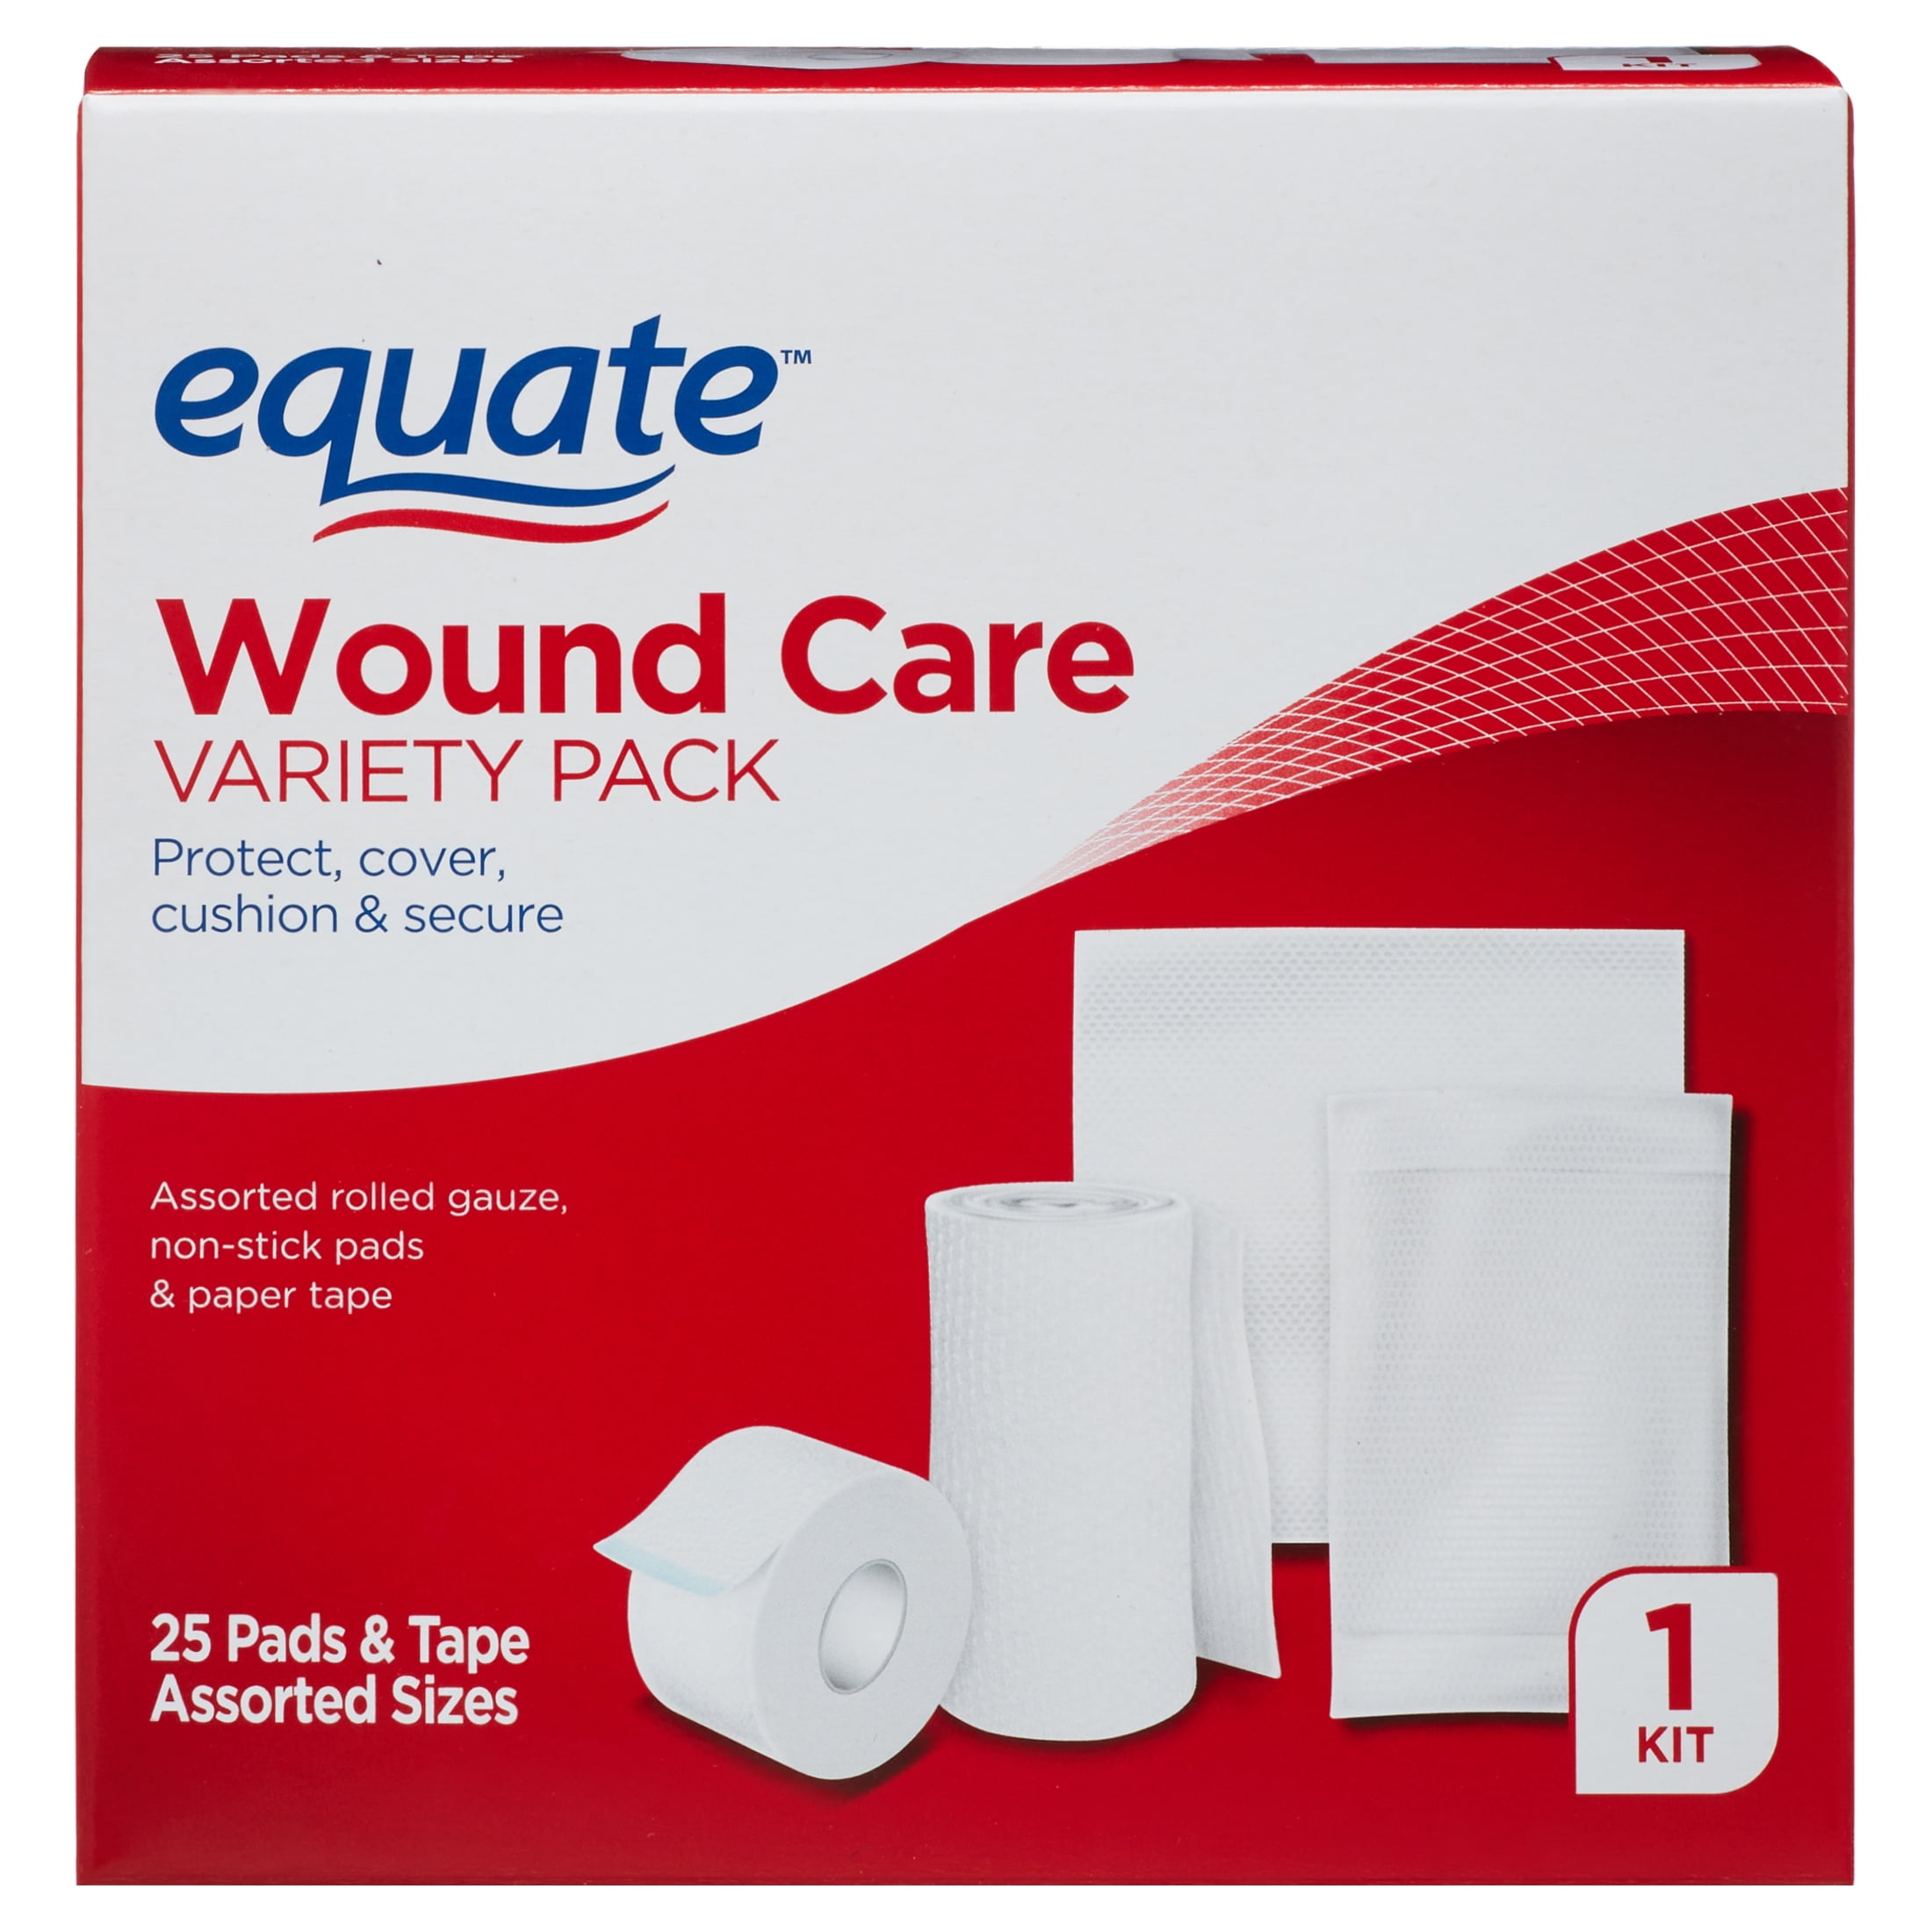 Equate Wound Care Kit Variety Pack, 25 Pads & Tape, Assorted Sizes